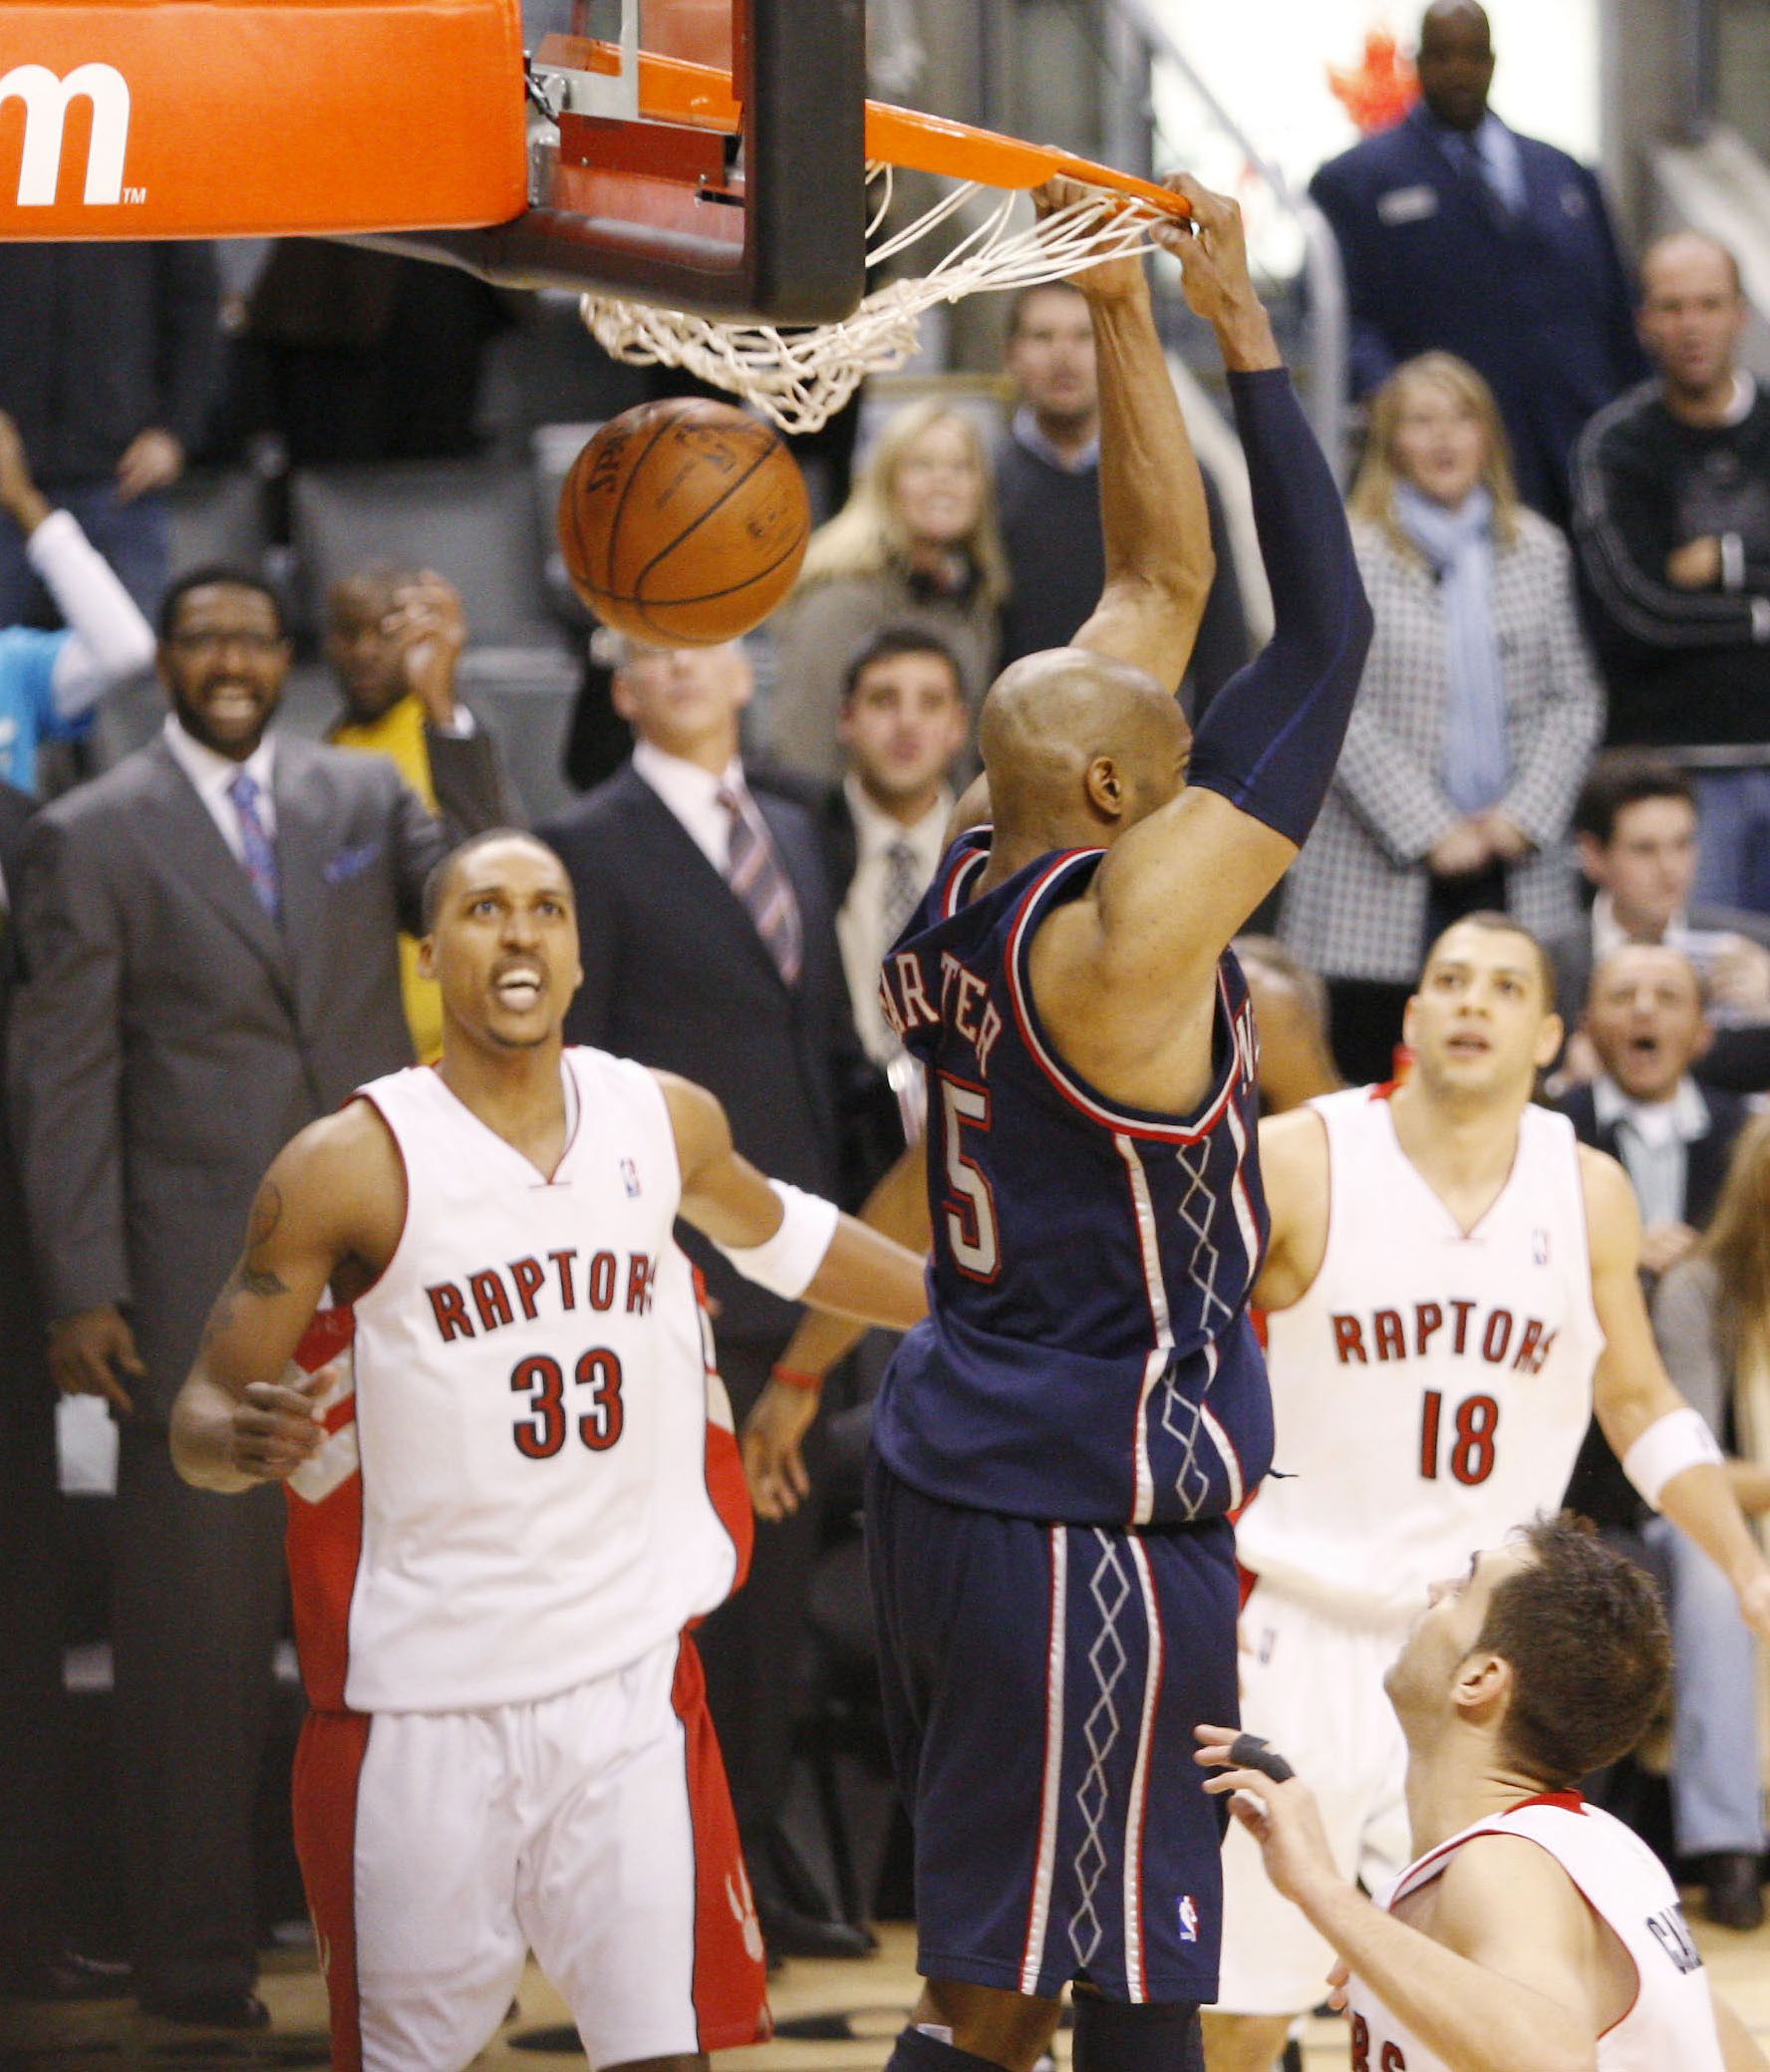 Toronto Raptors: 23 days of history - Vince Carter traded to